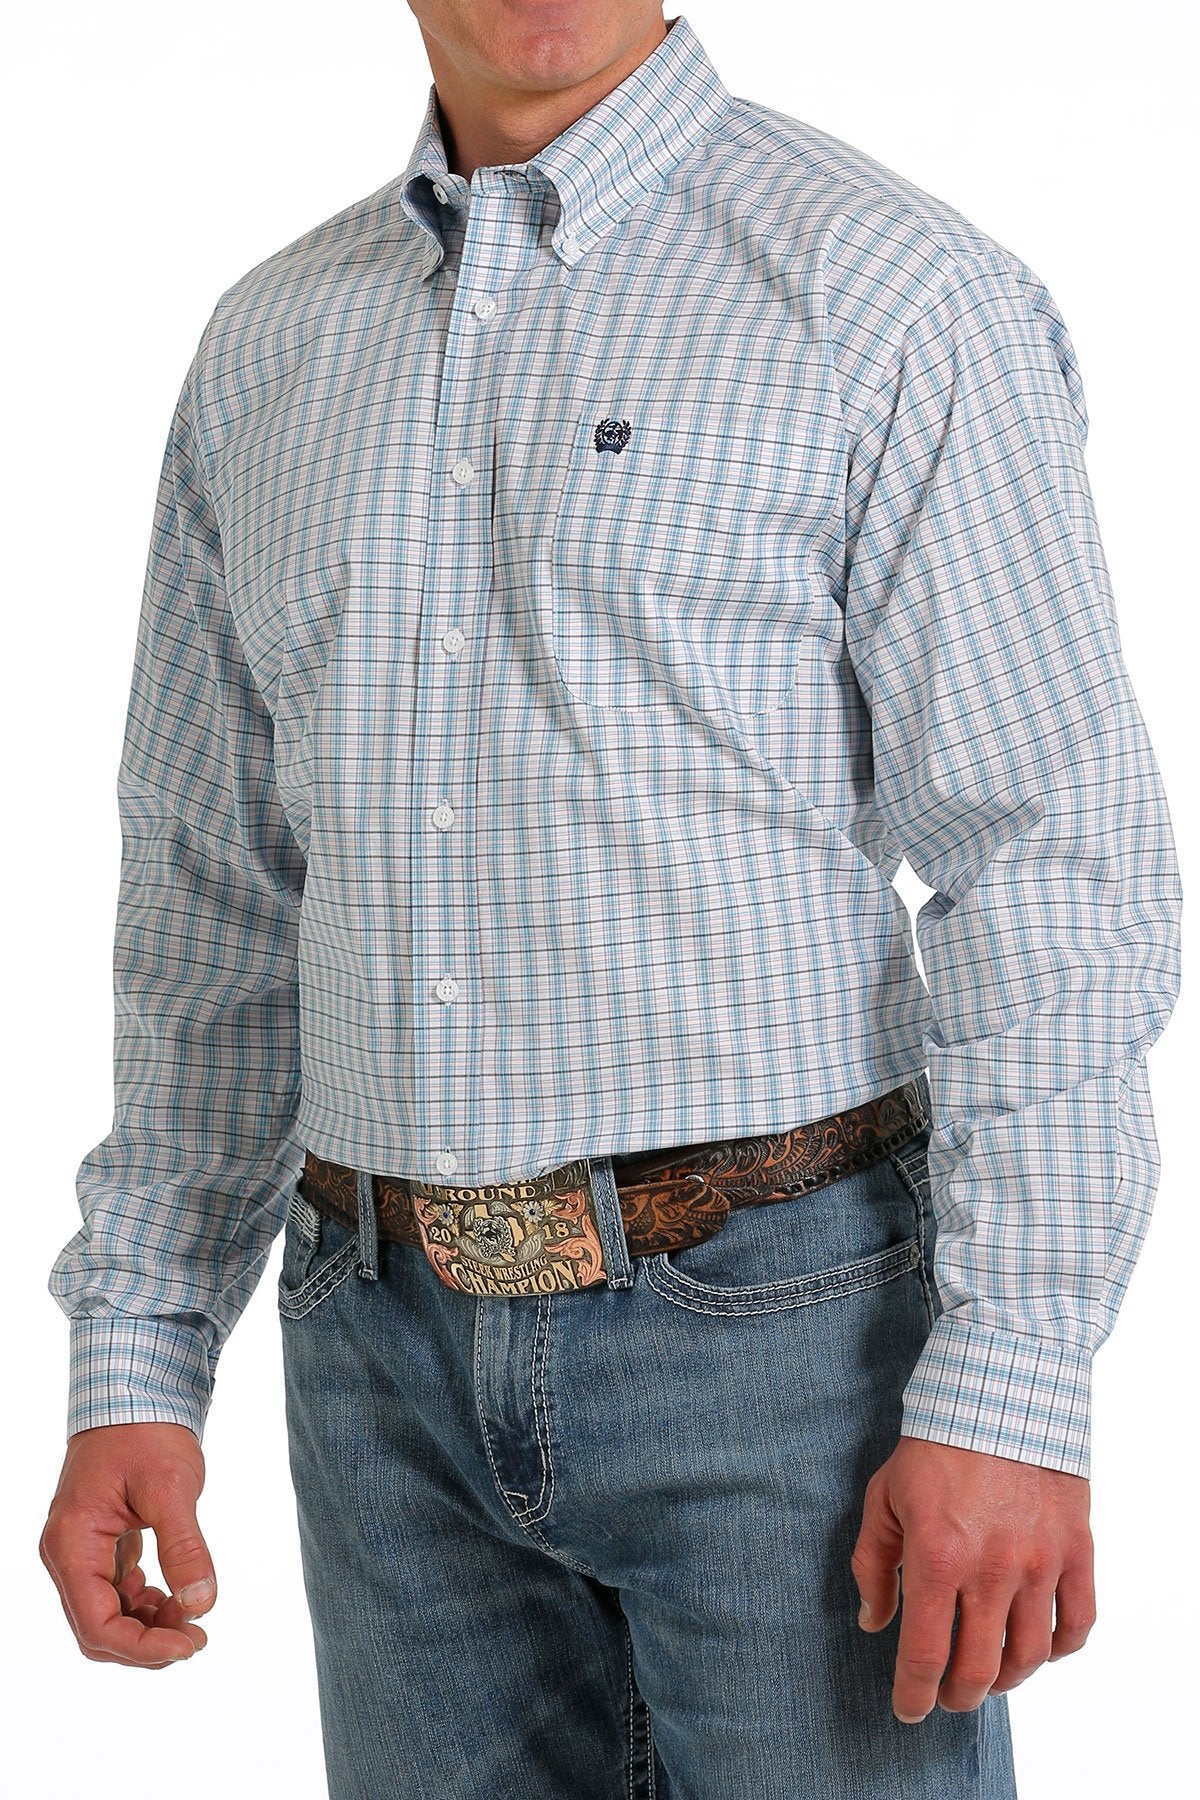 Men's Cinch Stretch Plaid White/Turquoise/Red Button Down Shirt